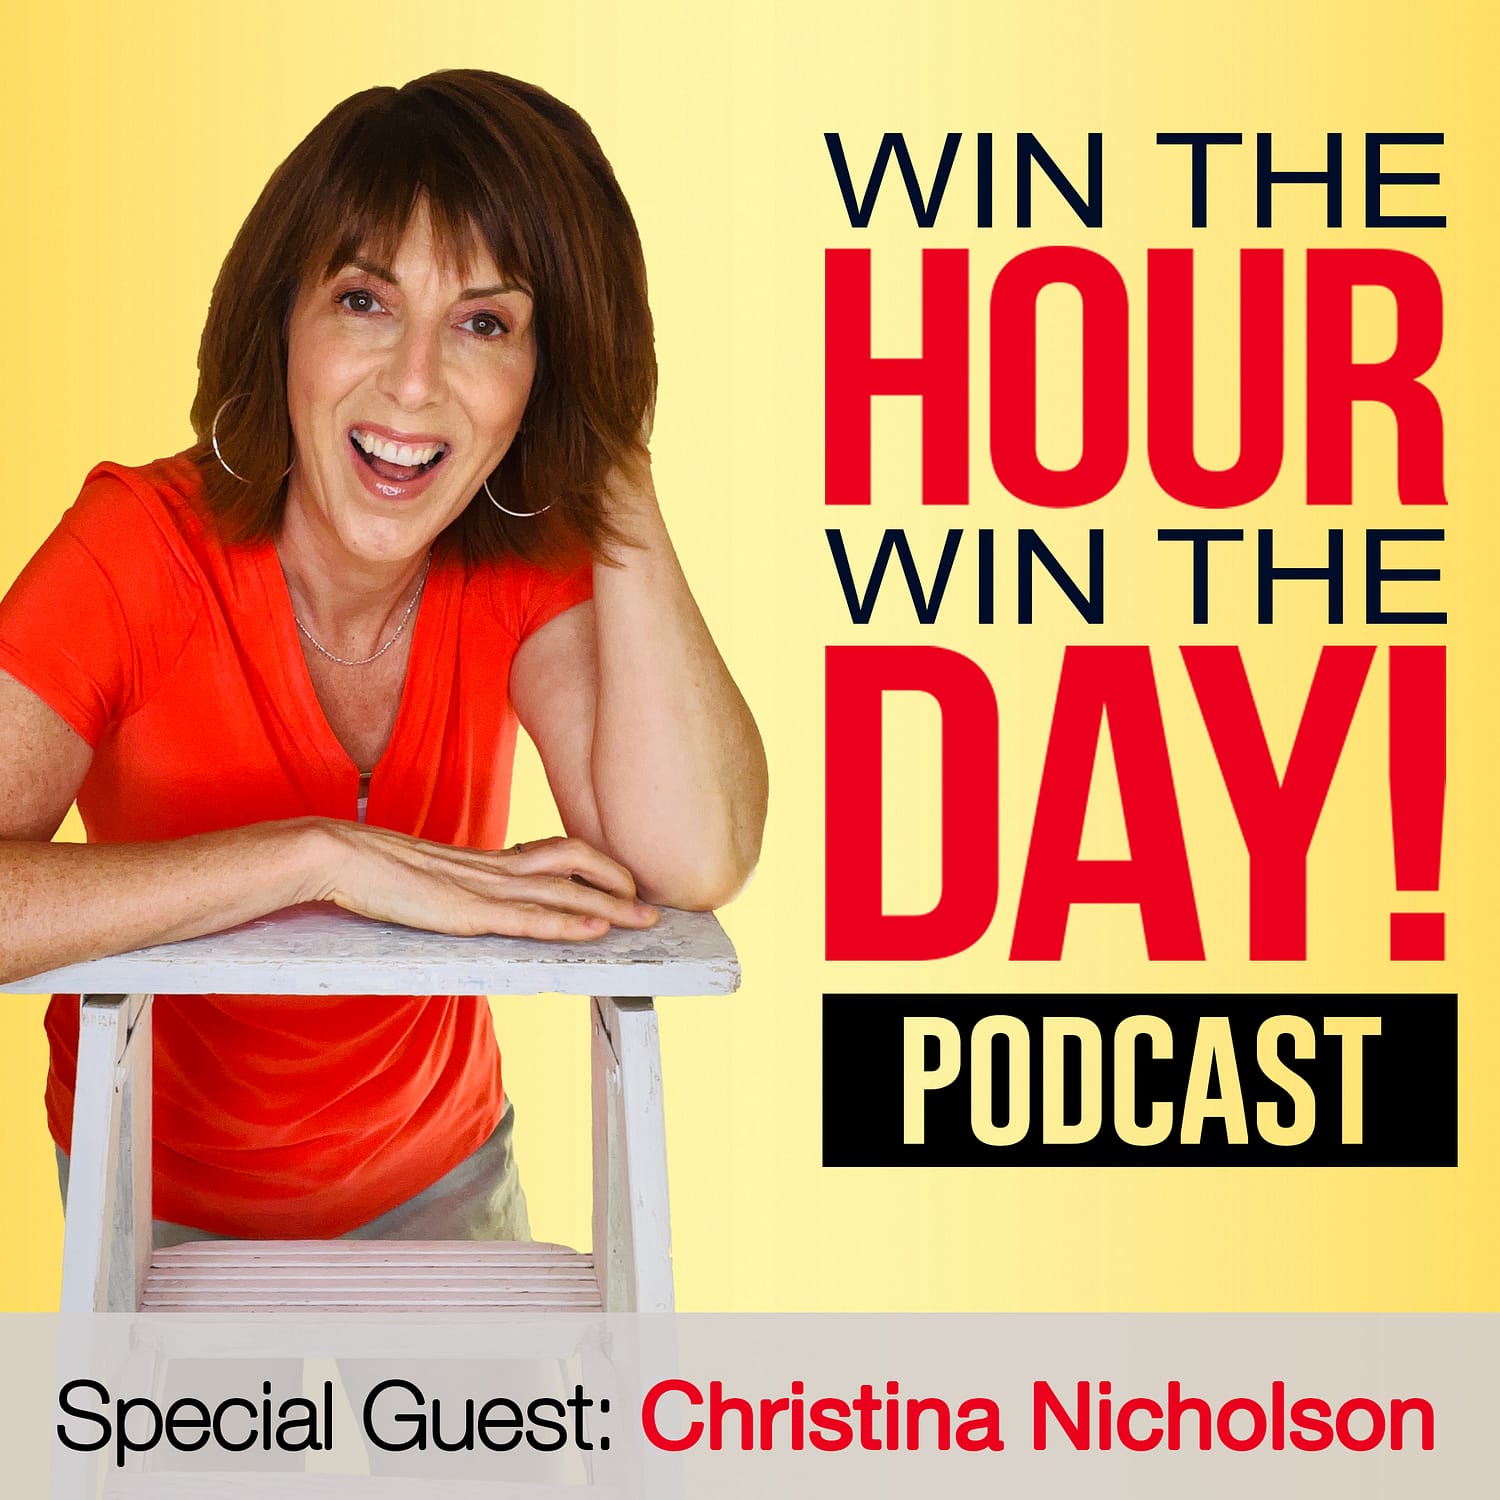 How To Easily Use PR To Grow Your Business! with Christina Nicholson